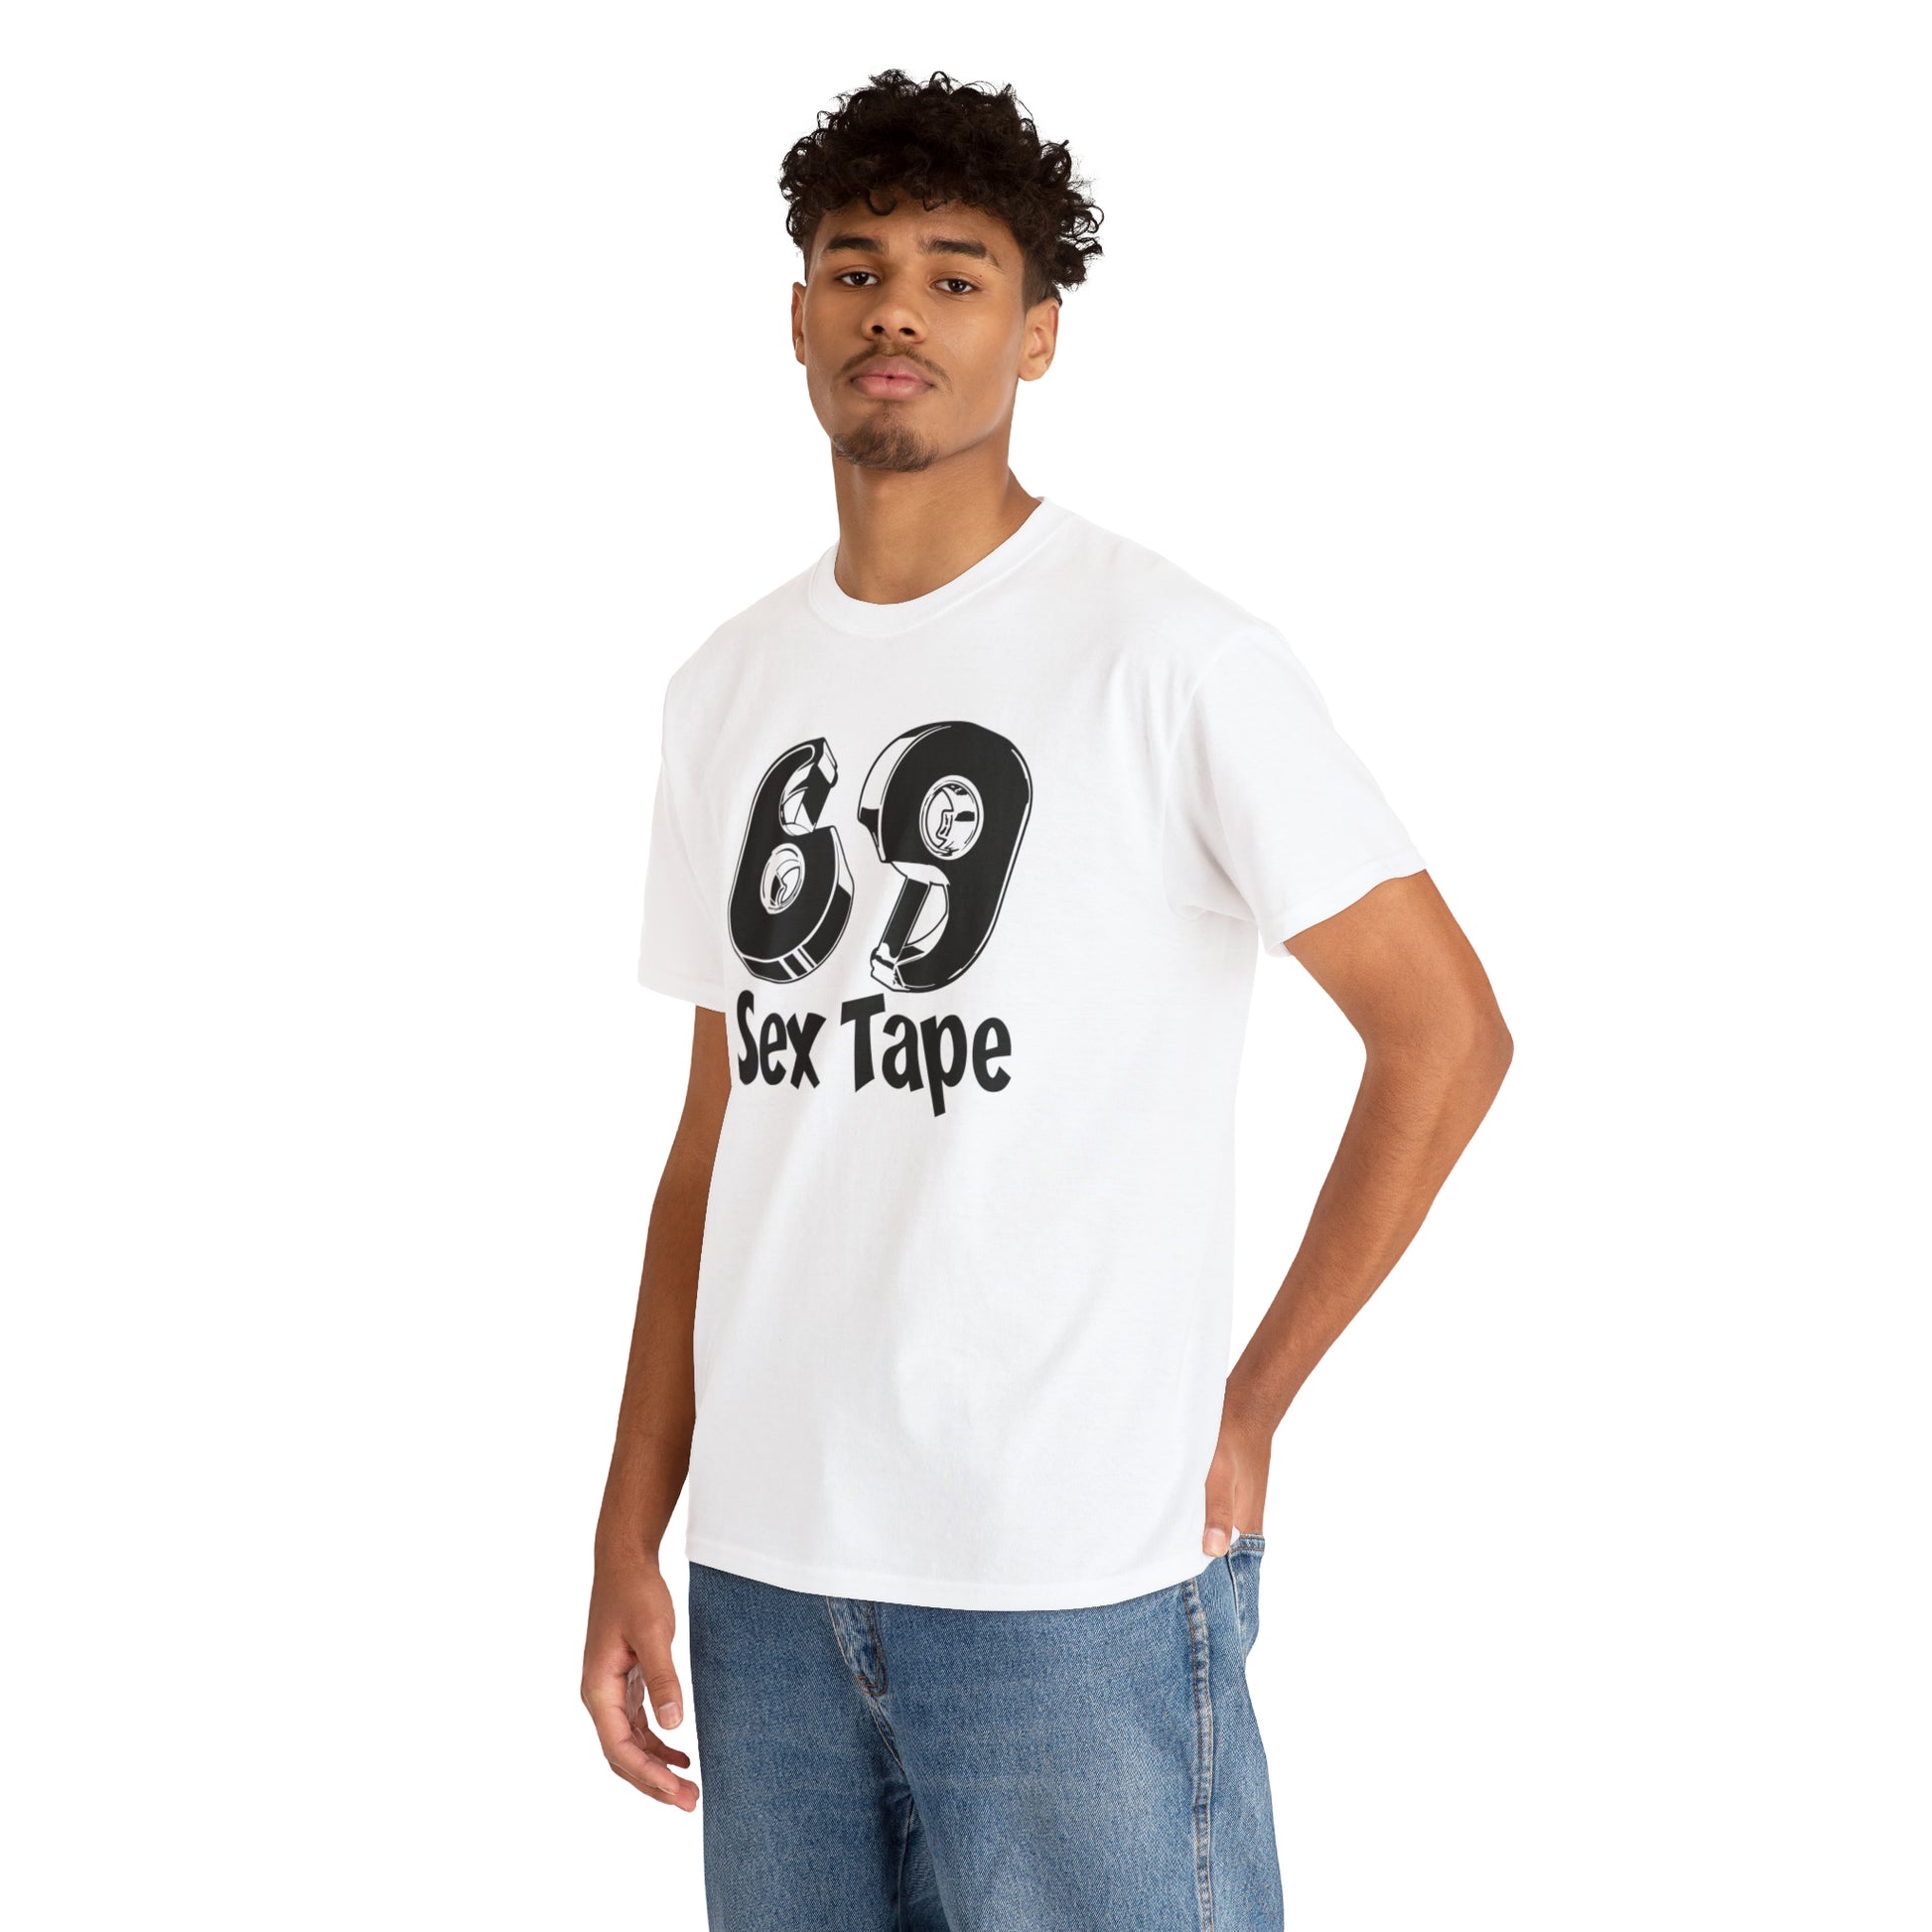 "Sex Tape" T-Shirt - Weave Got Gifts - Unique Gifts You Won’t Find Anywhere Else!